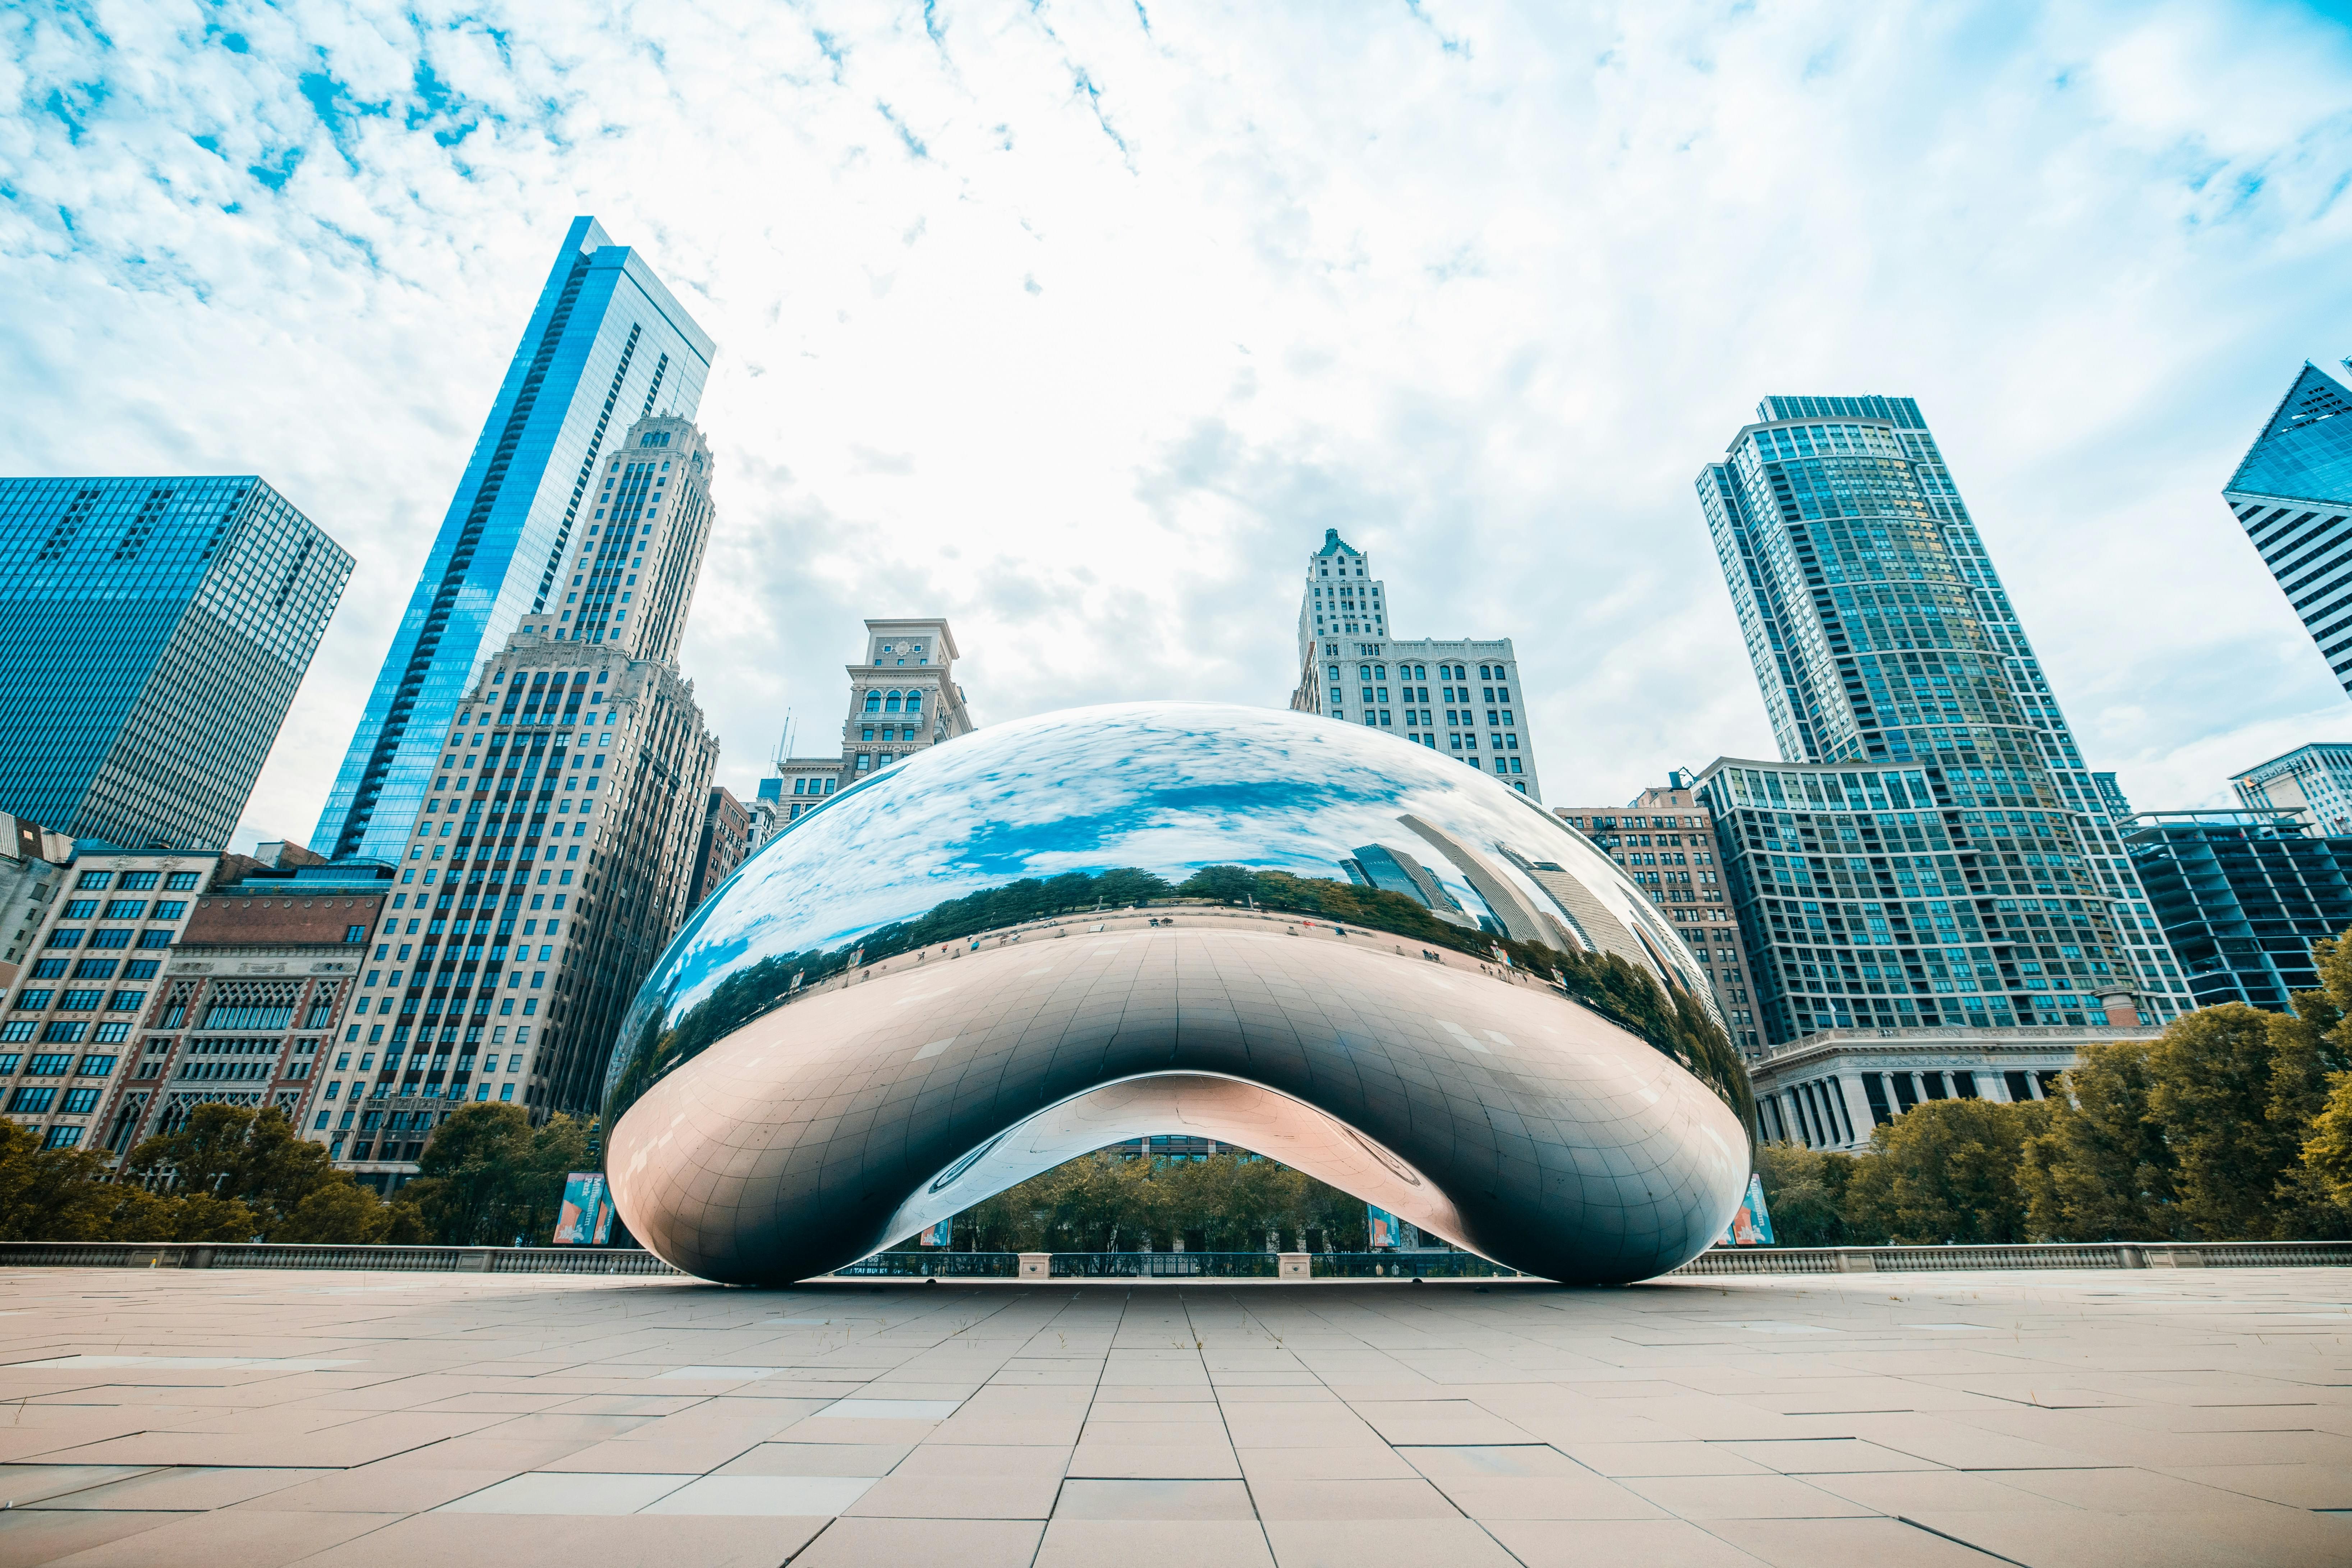 Chicago Tour Packages | Upto 50% Off May Mega SALE